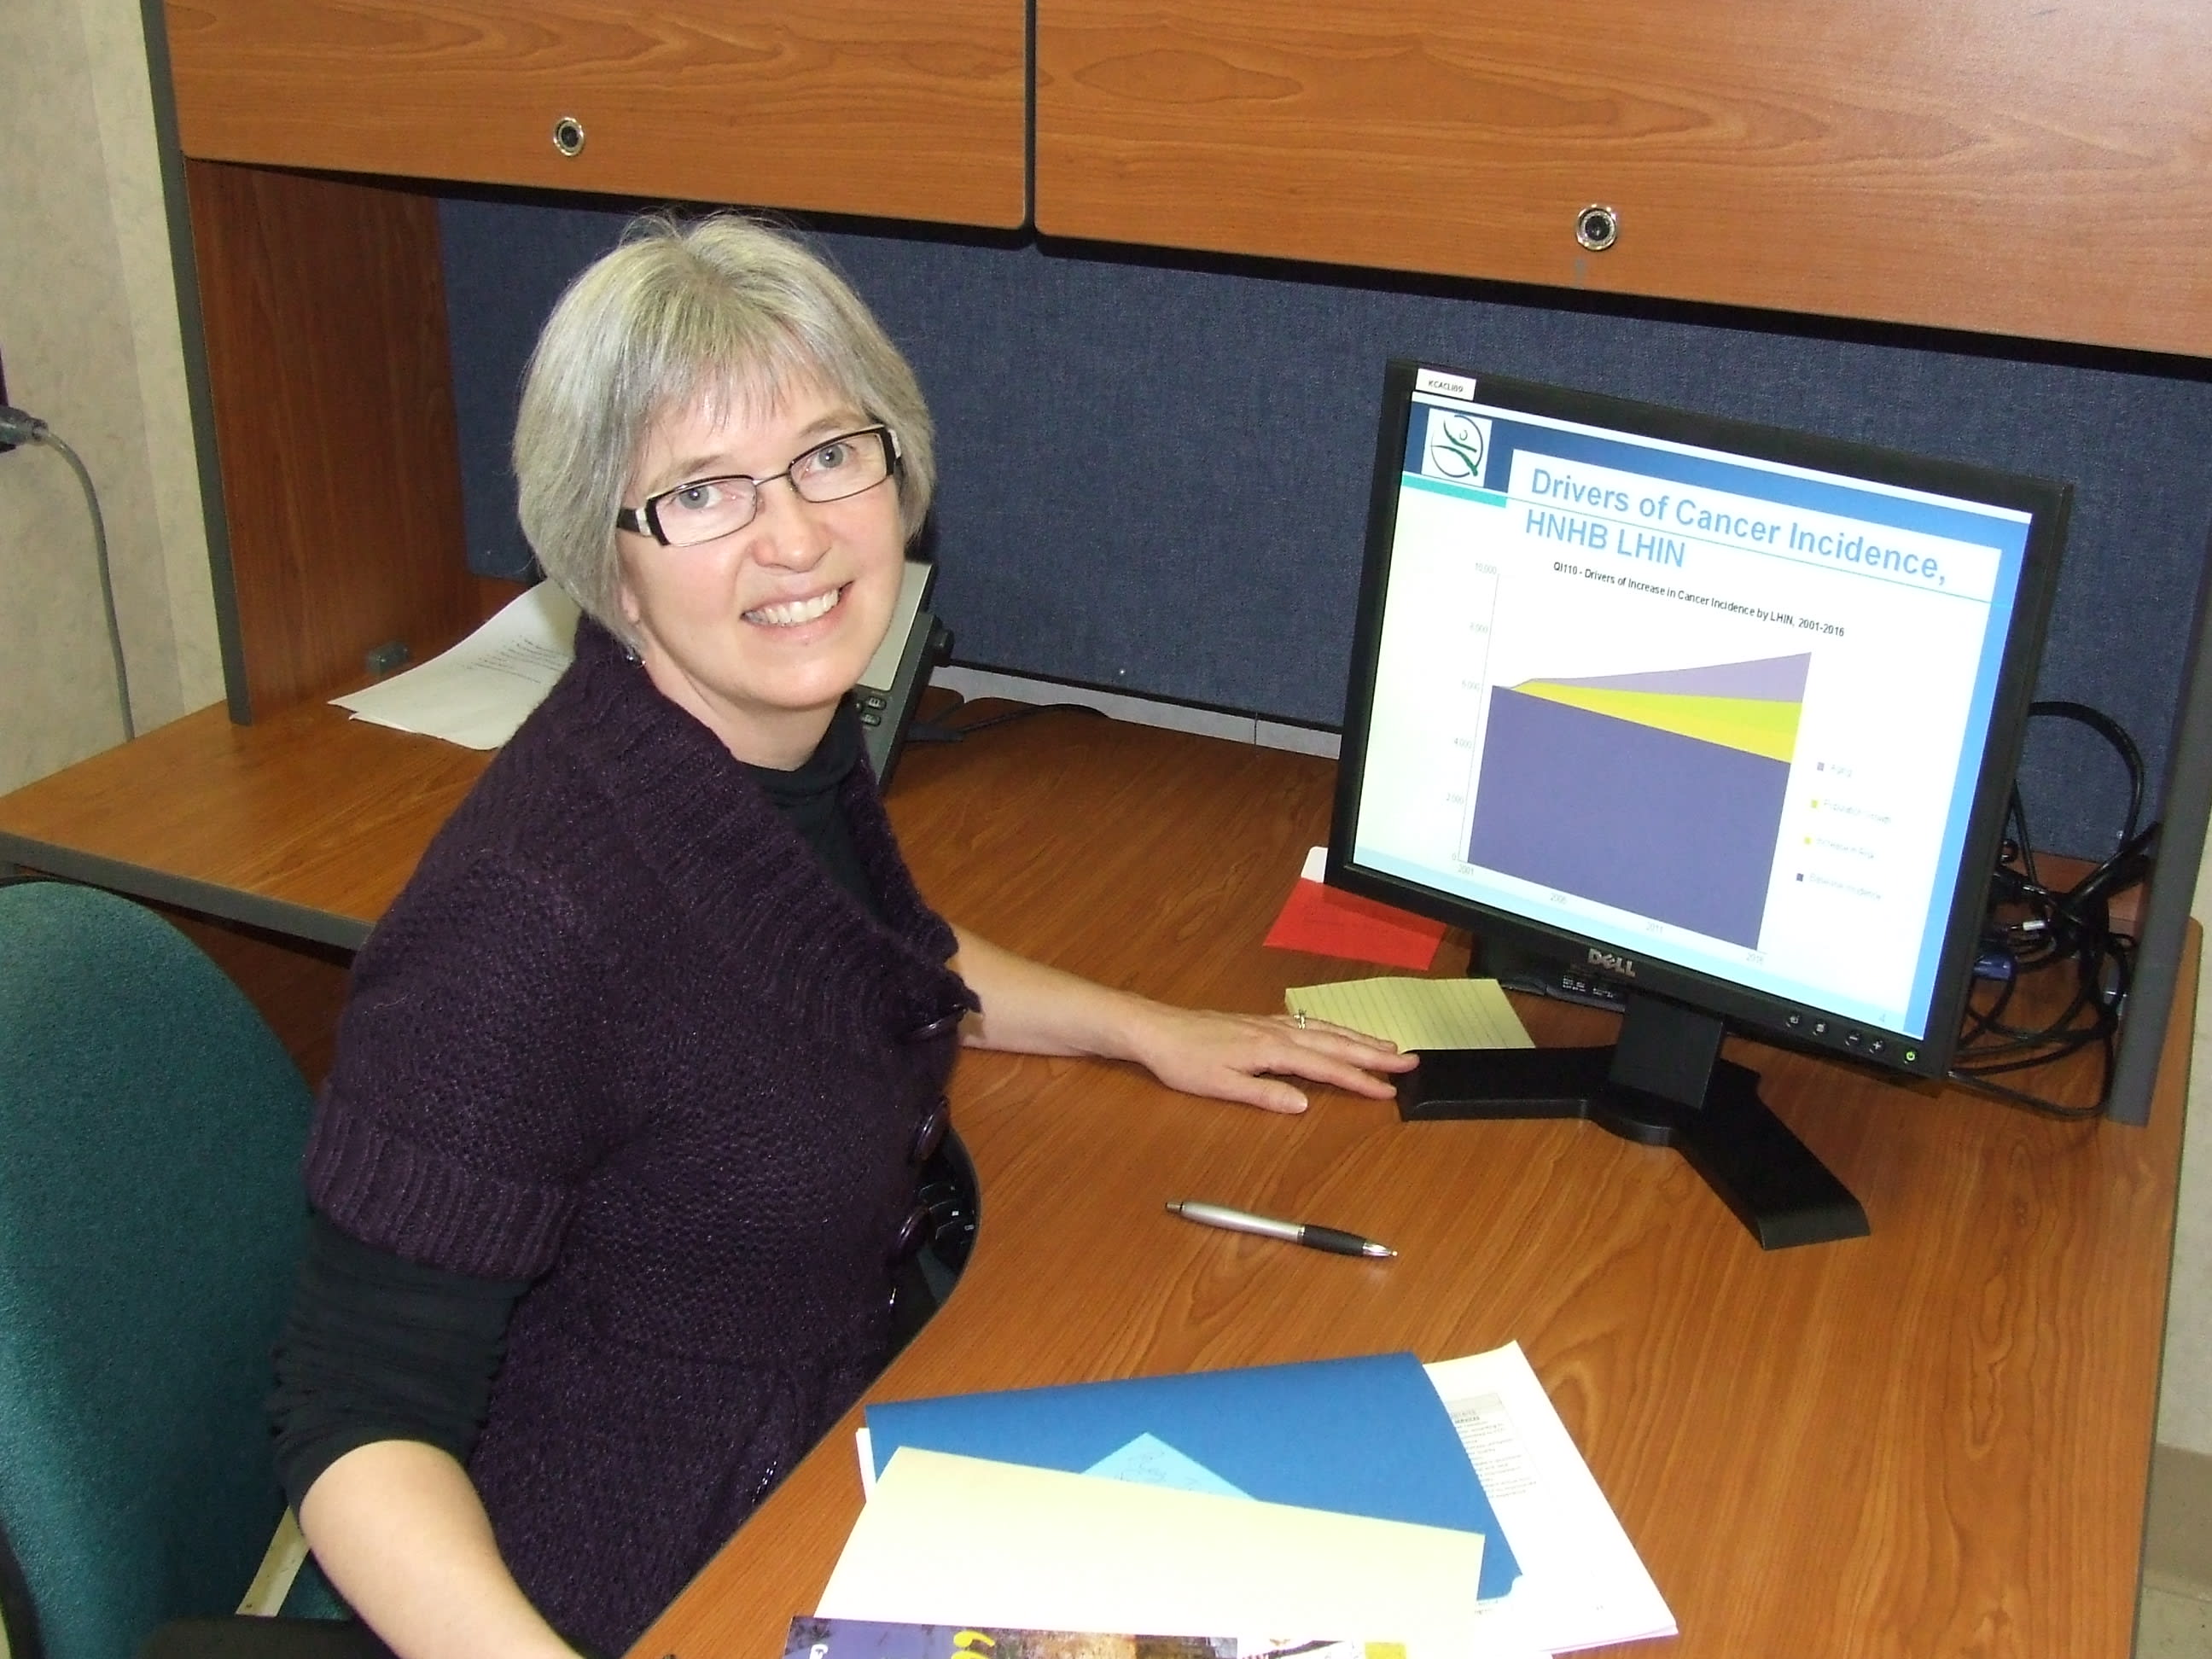 A woman sits at her desk with a computer showing a incidence rate chart for cancer